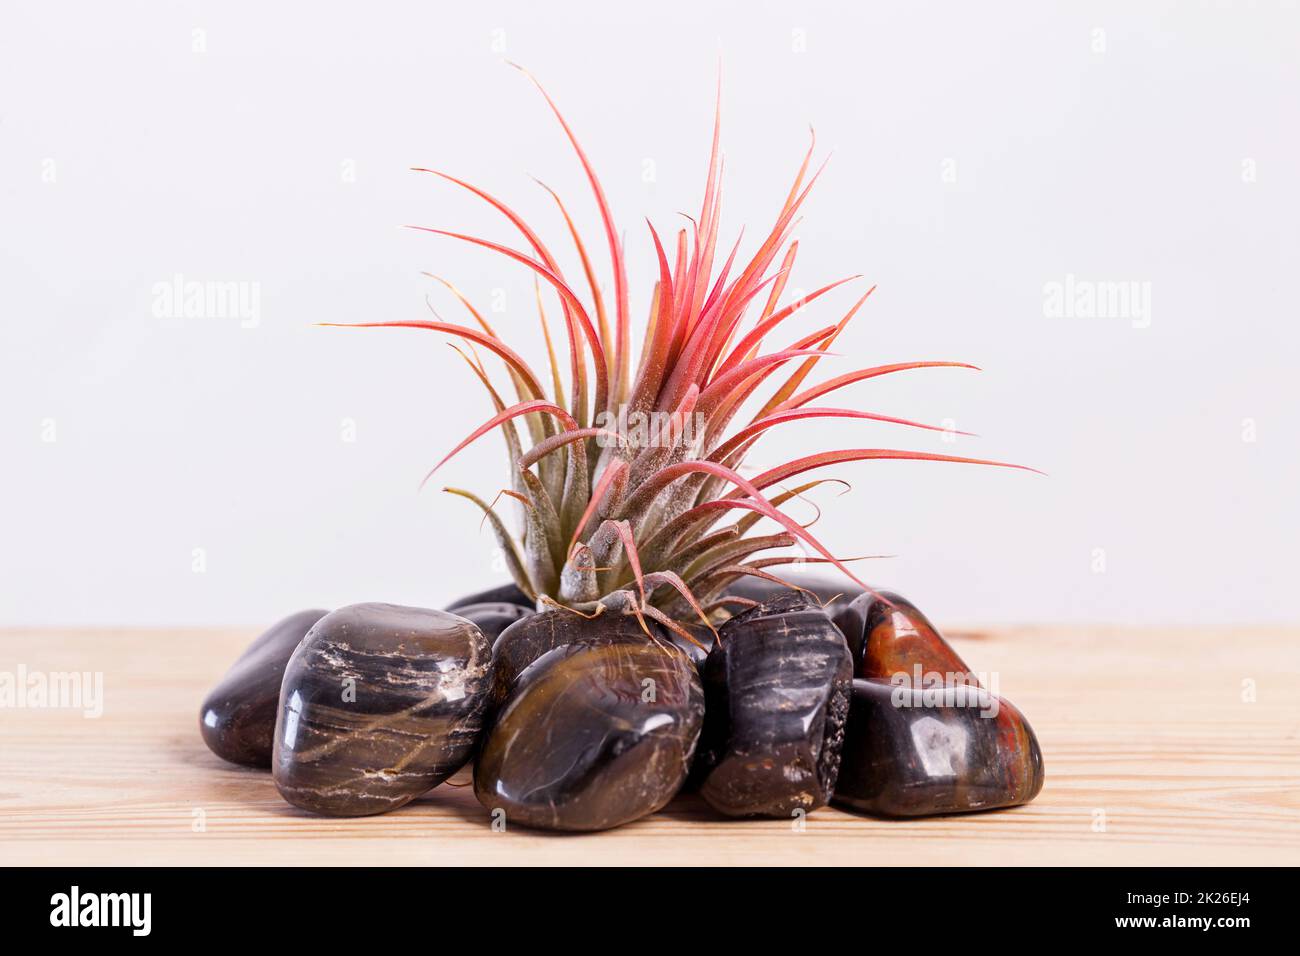 Tilandsia ionantha Airplant on shiny black stones on wooden table Stock Photo